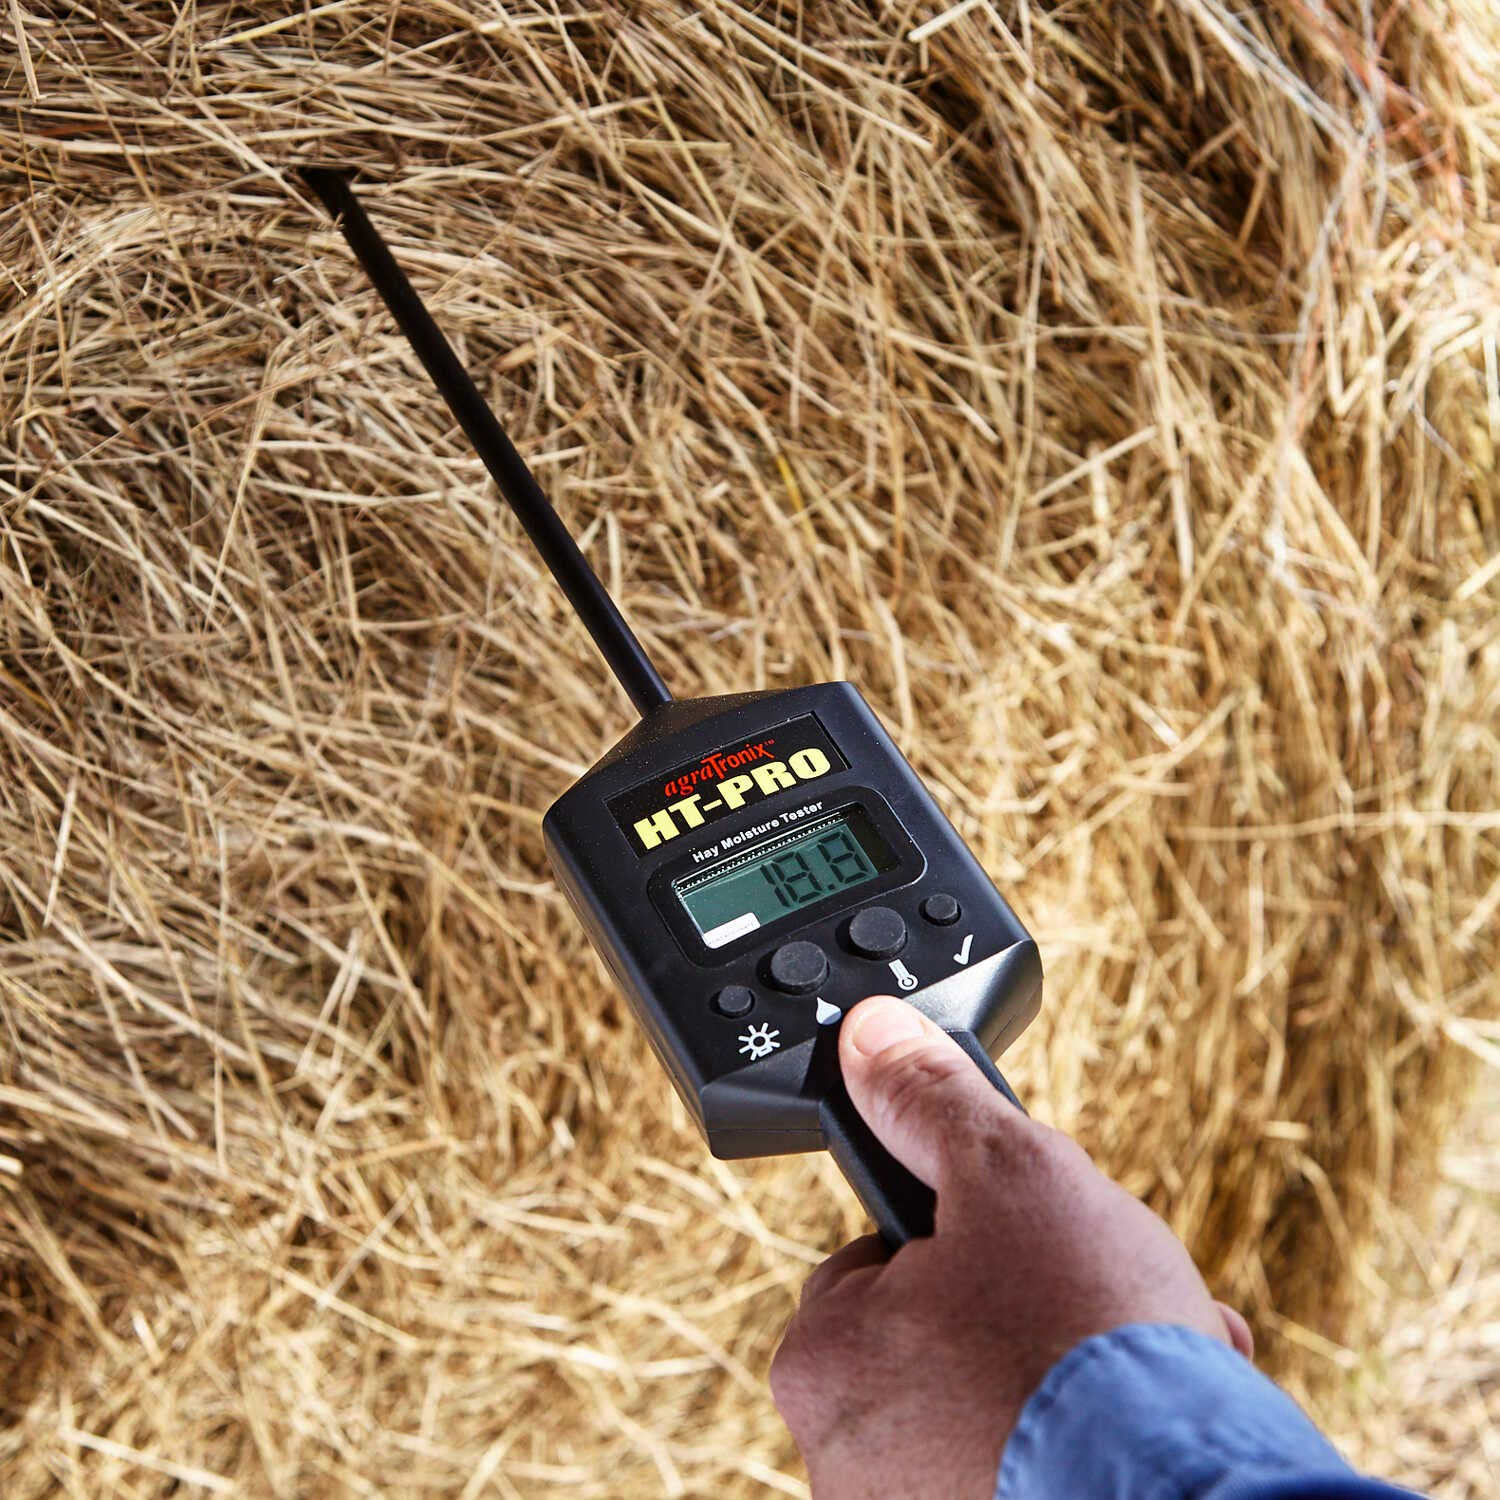 A portable hay moisture tester with a display showing the moisture content of the hay